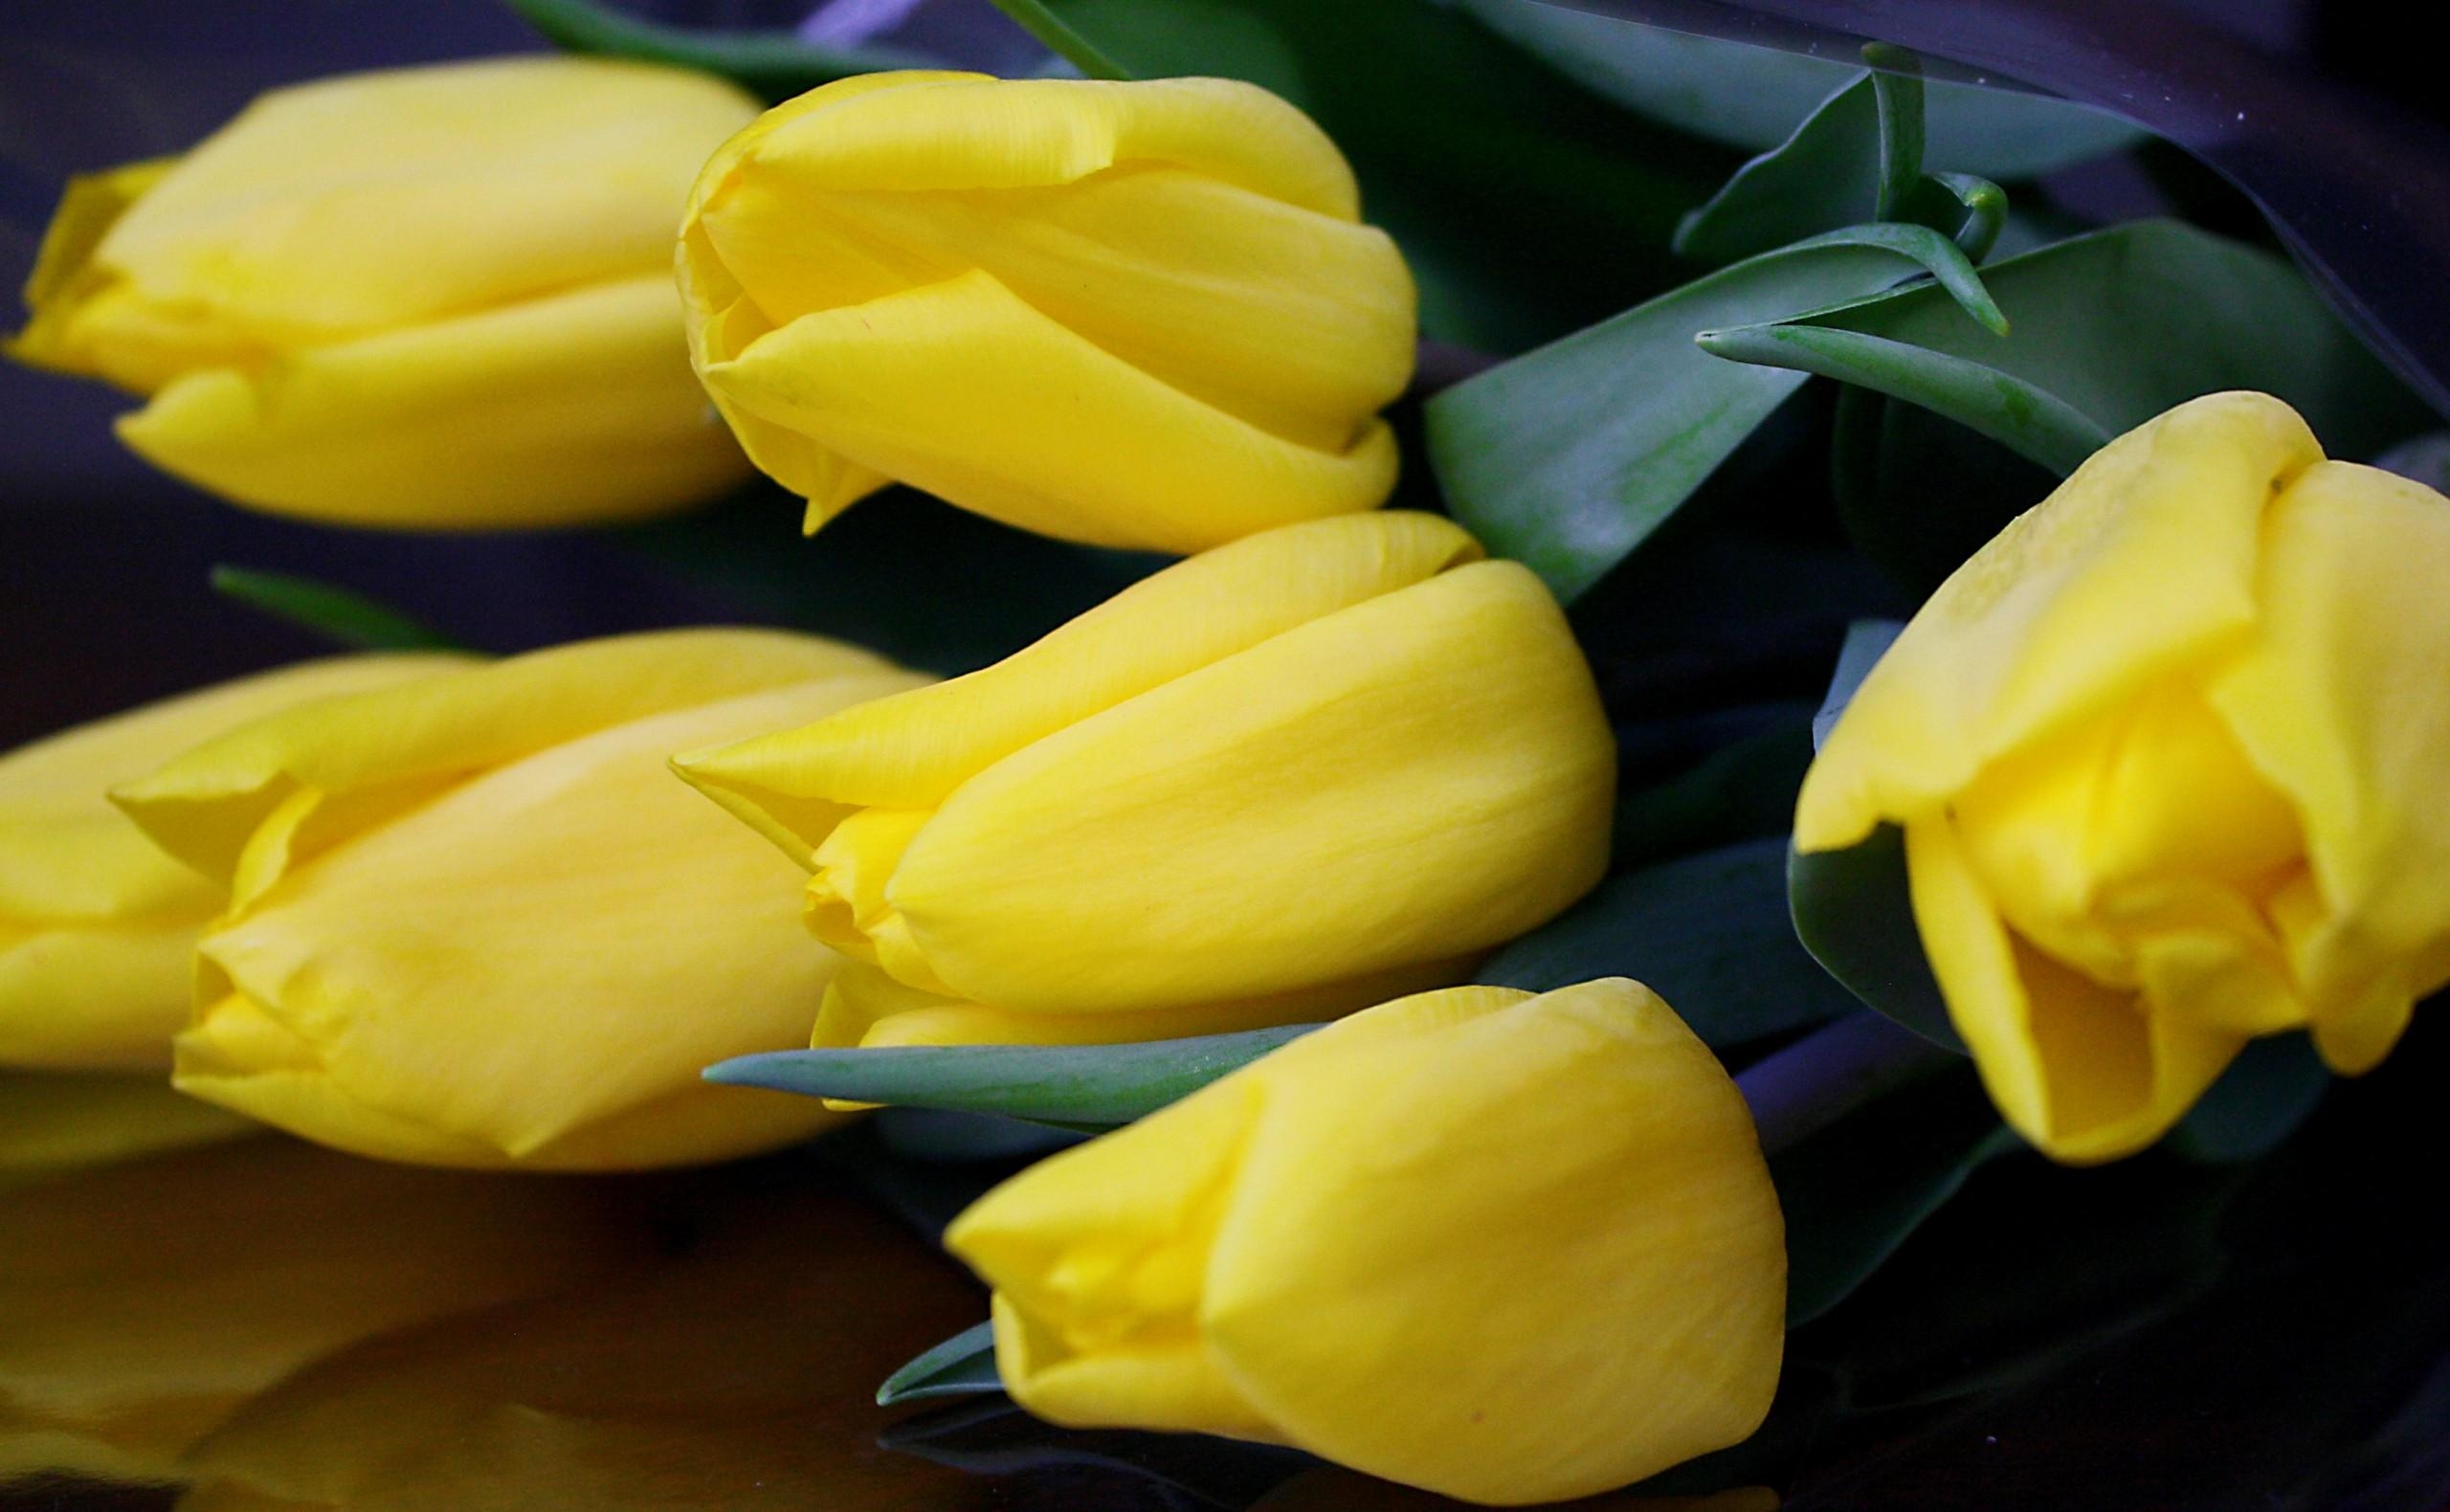 tulips, flowers, yellow, to lie down, lie